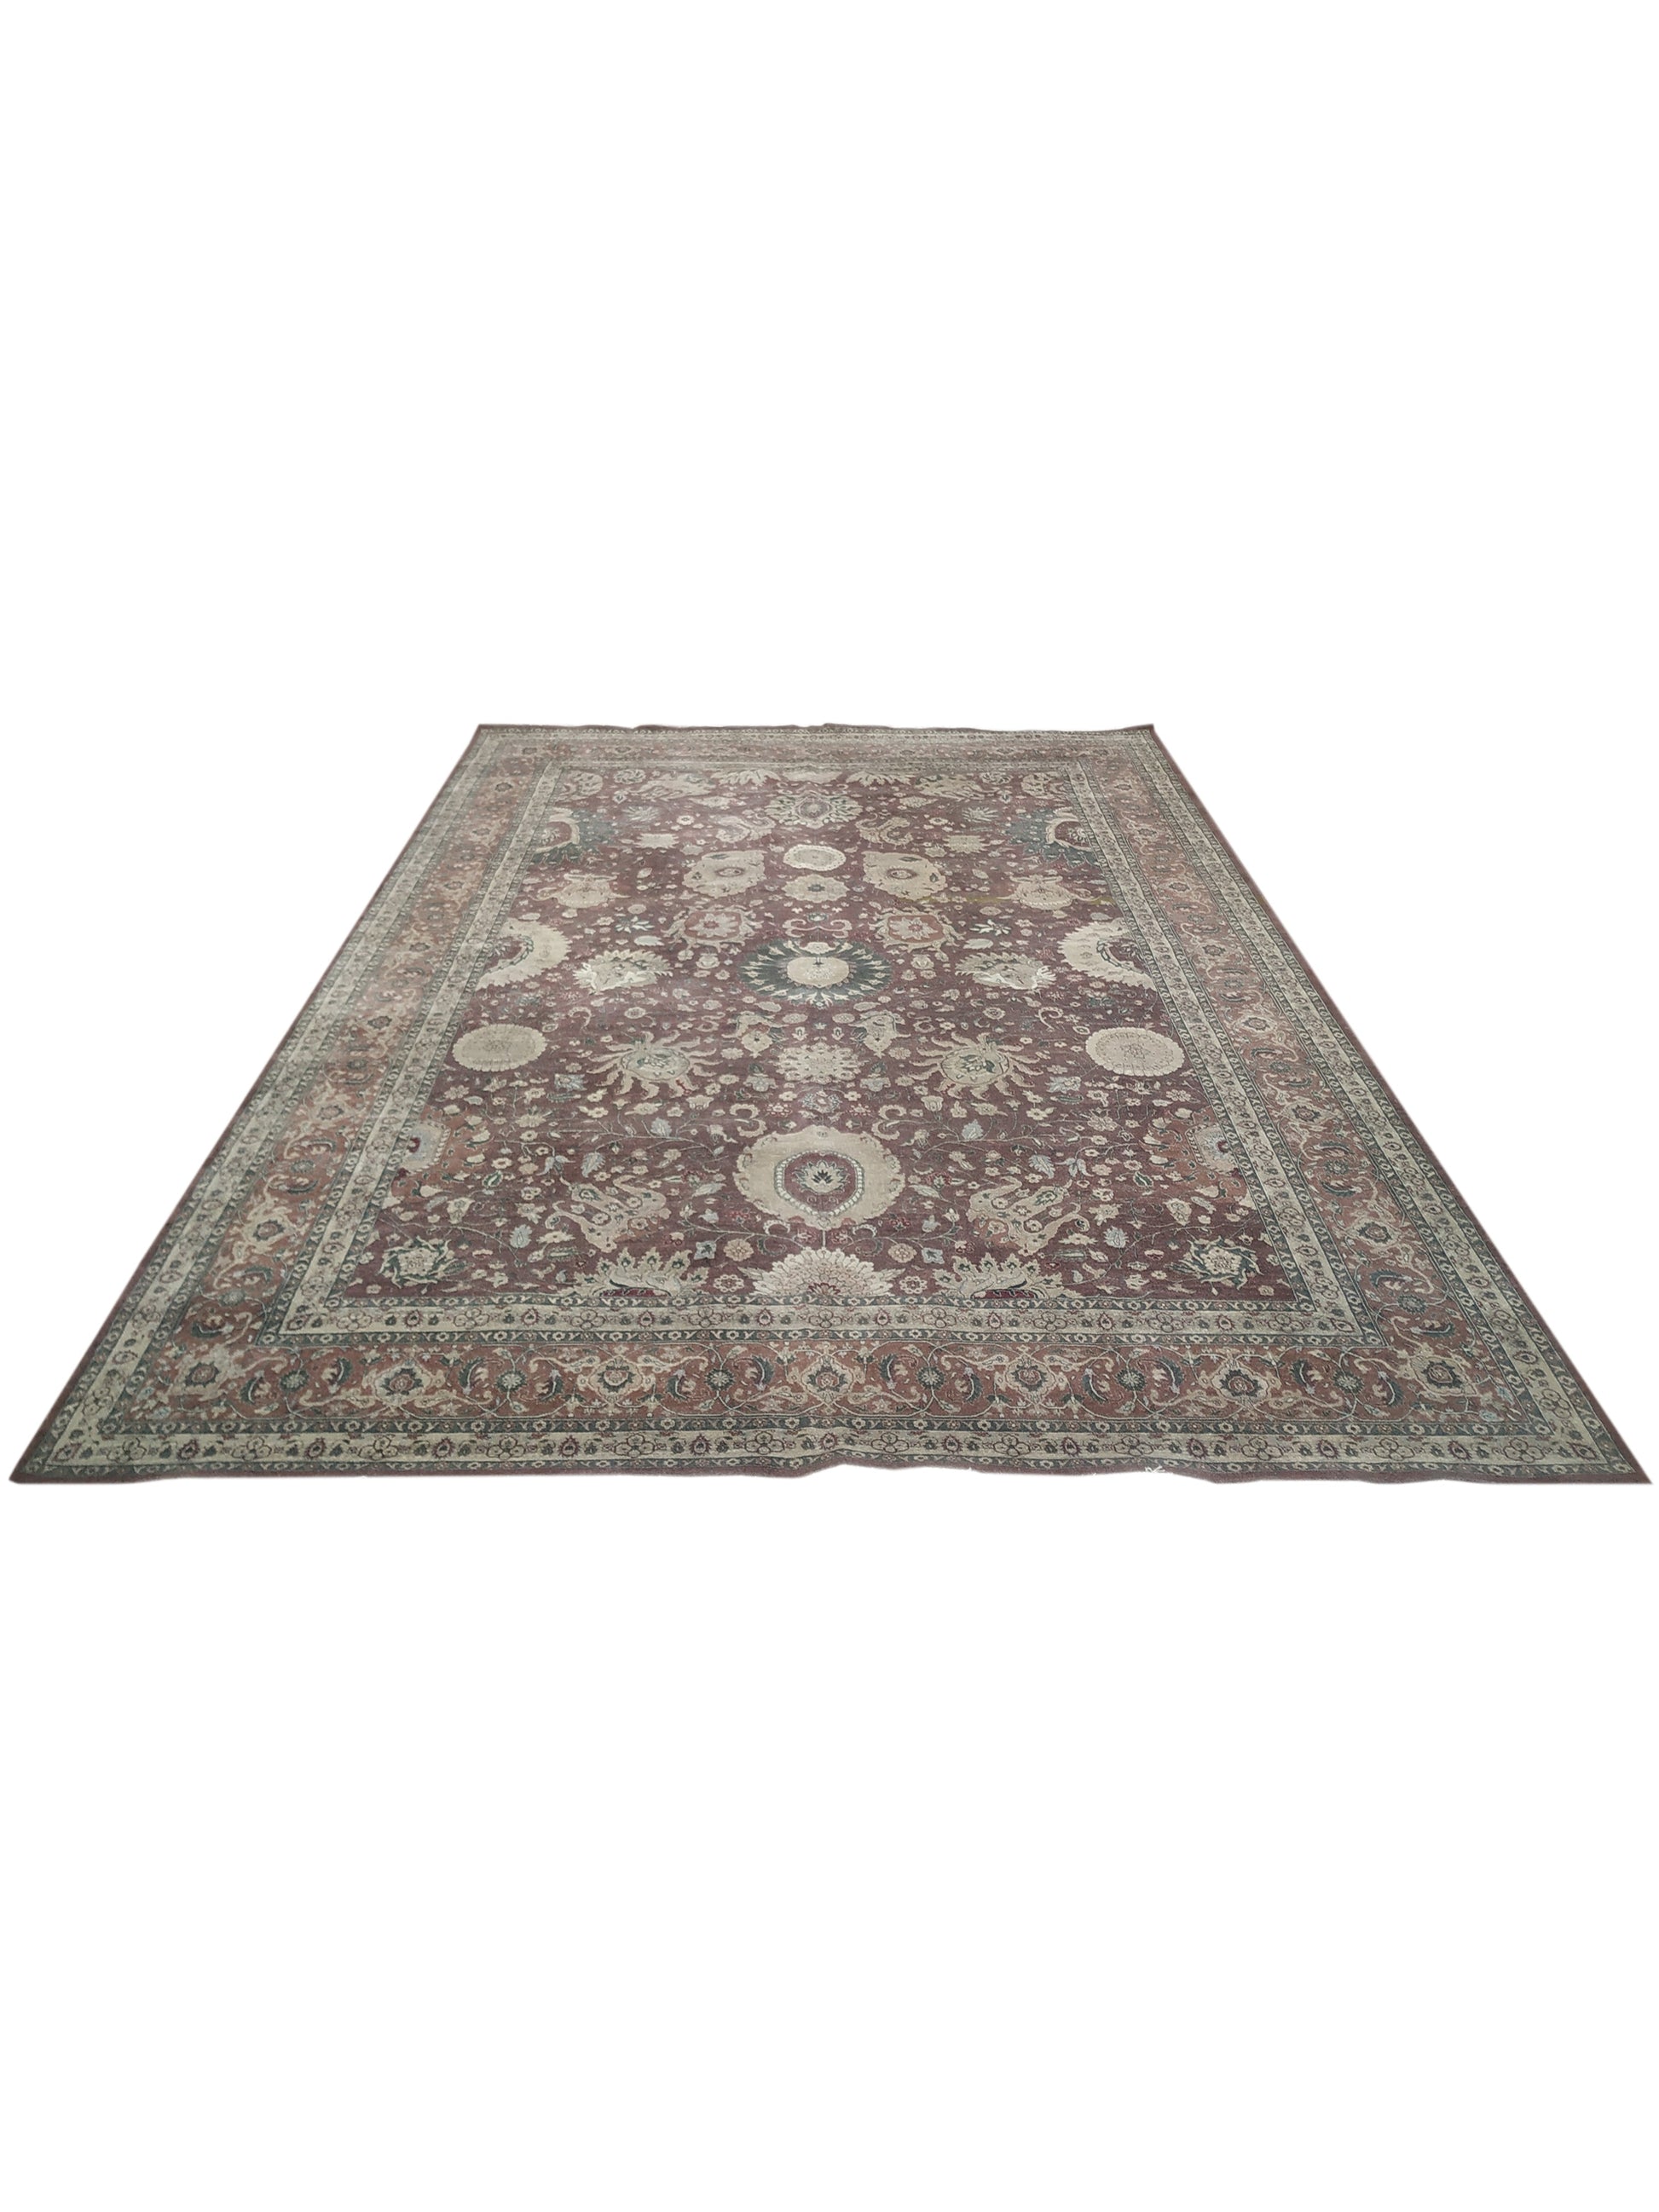 Get trendy with Rust, Ivory Pure Wool Traditional Agra Area Rug 9.11x13.11ft 303x424Cms - Traditional Rugs available at Jaipur Oriental Rugs. Grab yours for $5799.00 today!